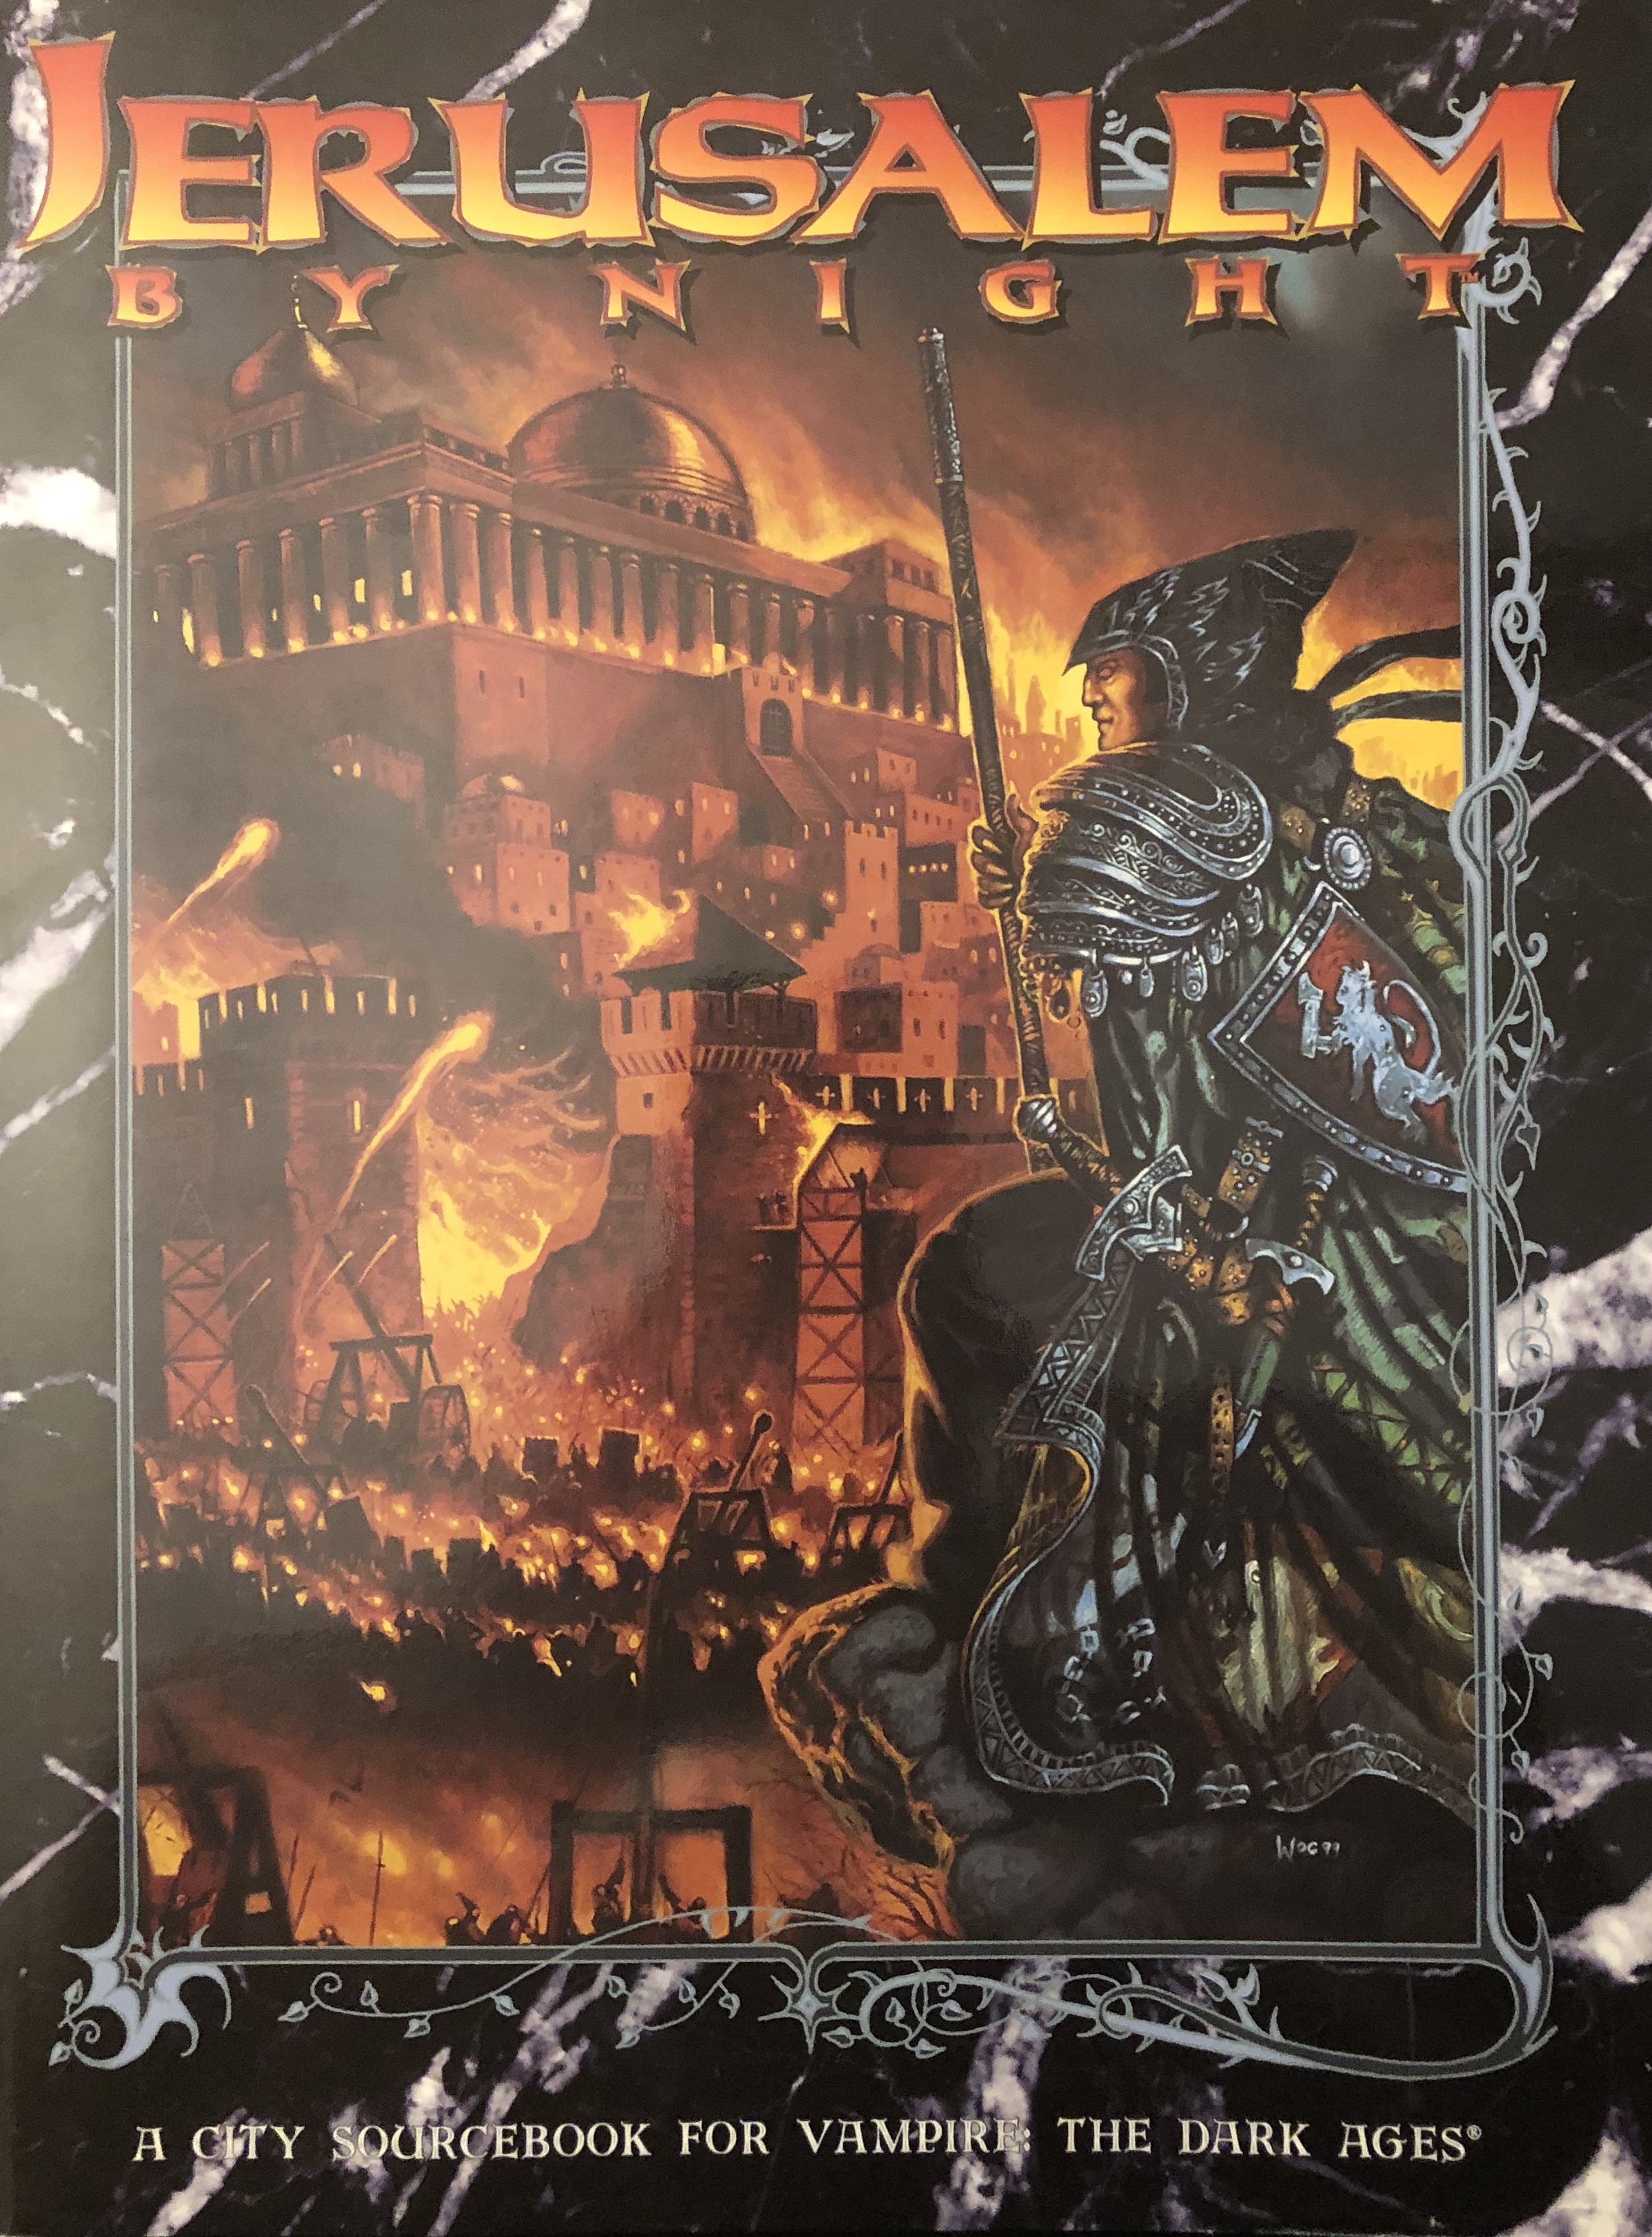 Vampire Ser.: The Dark Ages: Vampire : The Dark Ages by Kevin Hassall Jennifer Hartshorn 1996, Hardcover for sale online Ethan Skemp and Mark Rein-Hagen 